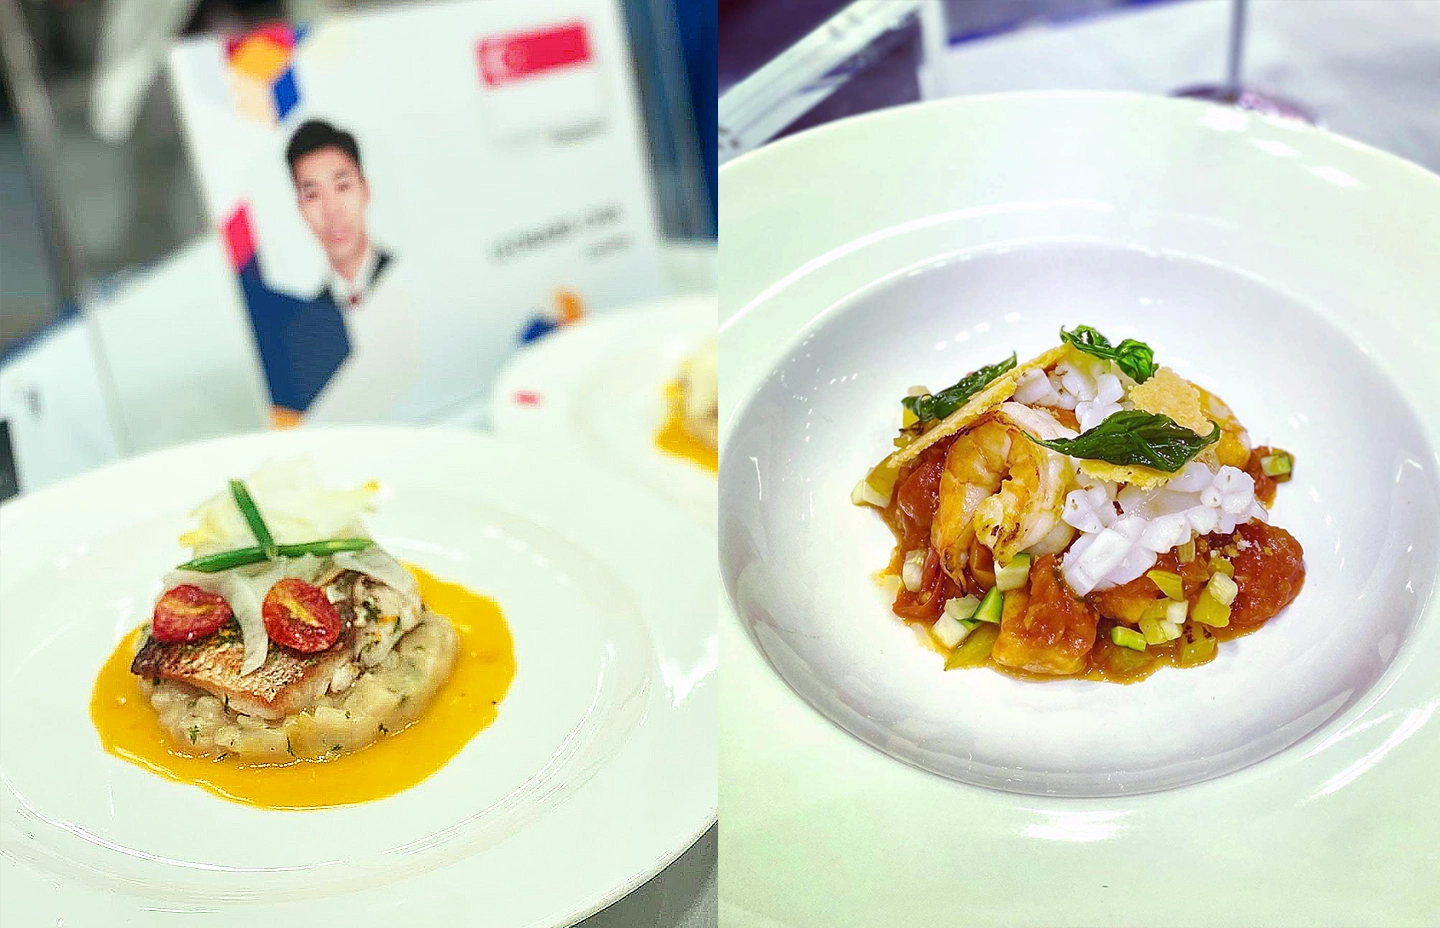 Saffron Velouté with Sea Bass (left) and Tomato Gnocchi with Assorted Seafood (right)